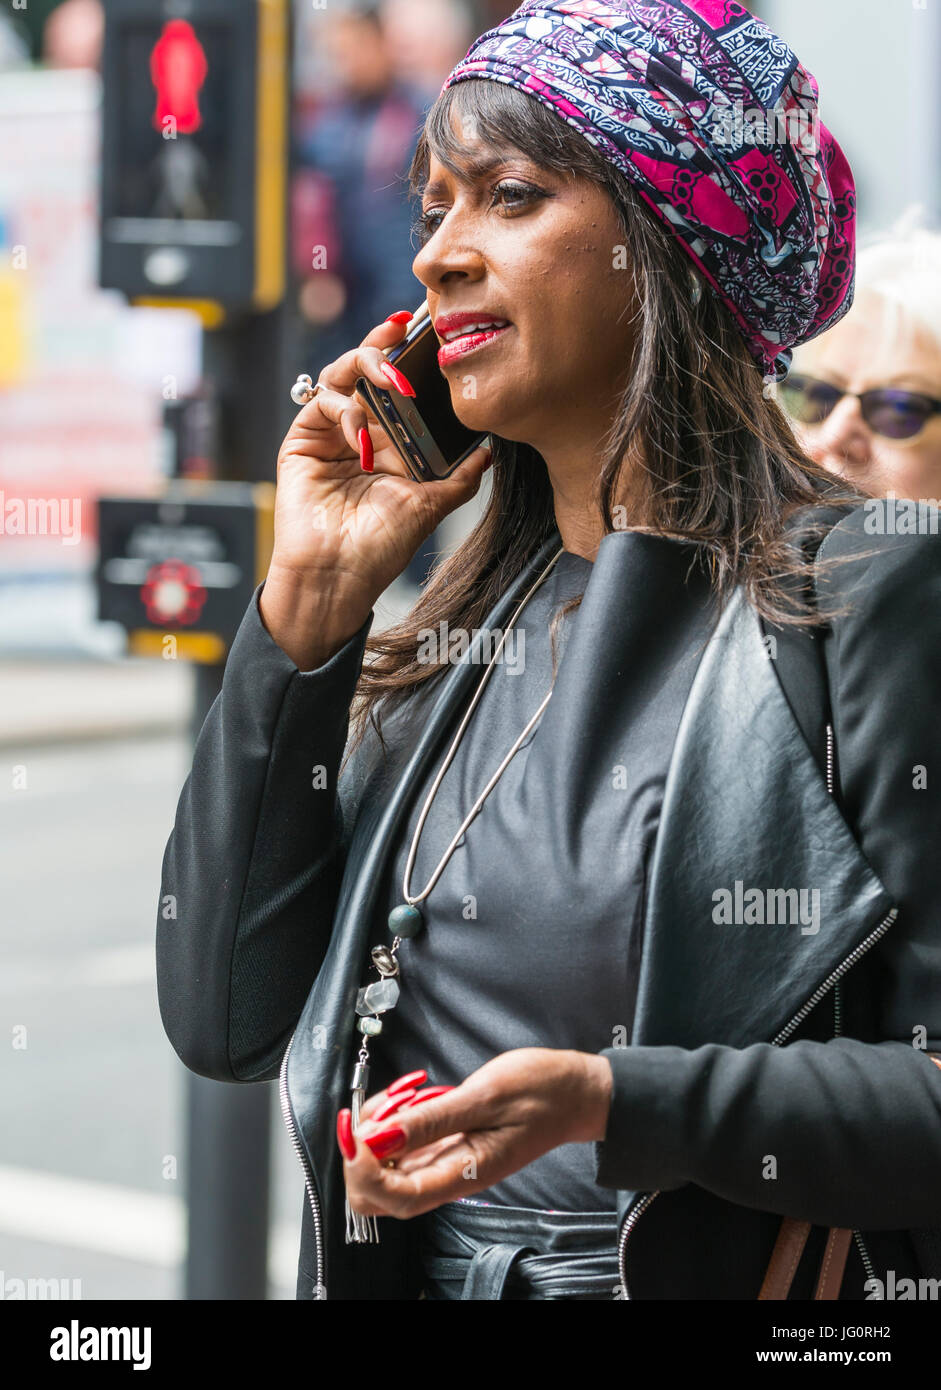 Woman of ethnic origin wearing smart clothes and a head scrarf while walking in a city and speaking on her mobile phone. Stock Photo